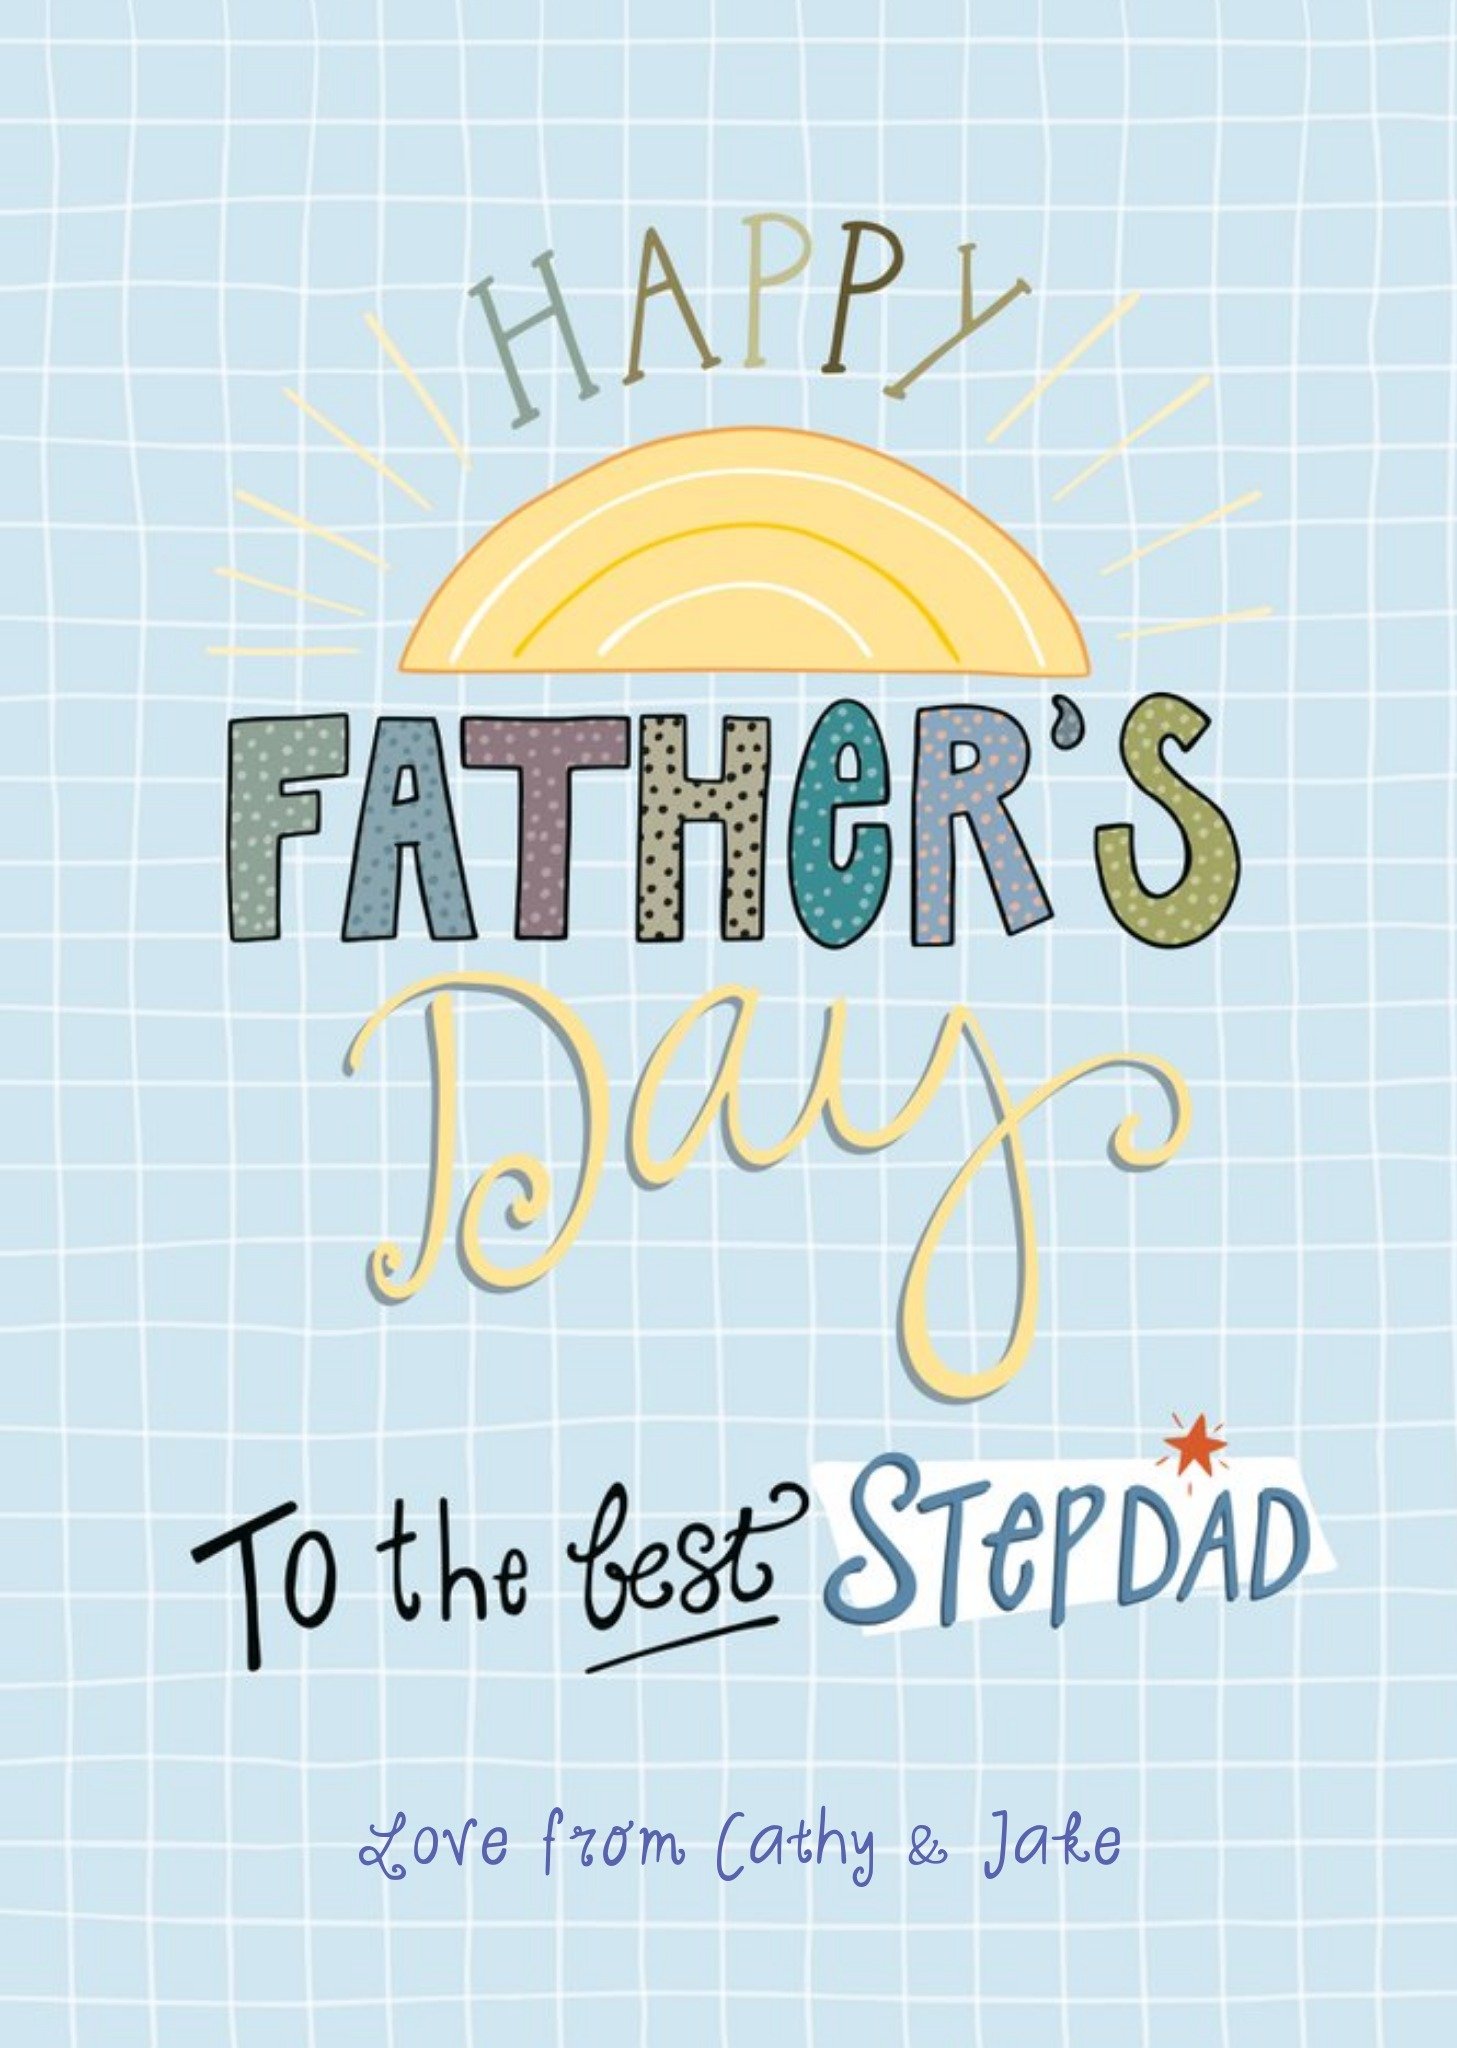 Moonpig Sunshine To The Best Stepdad Father's Day Card Ecard